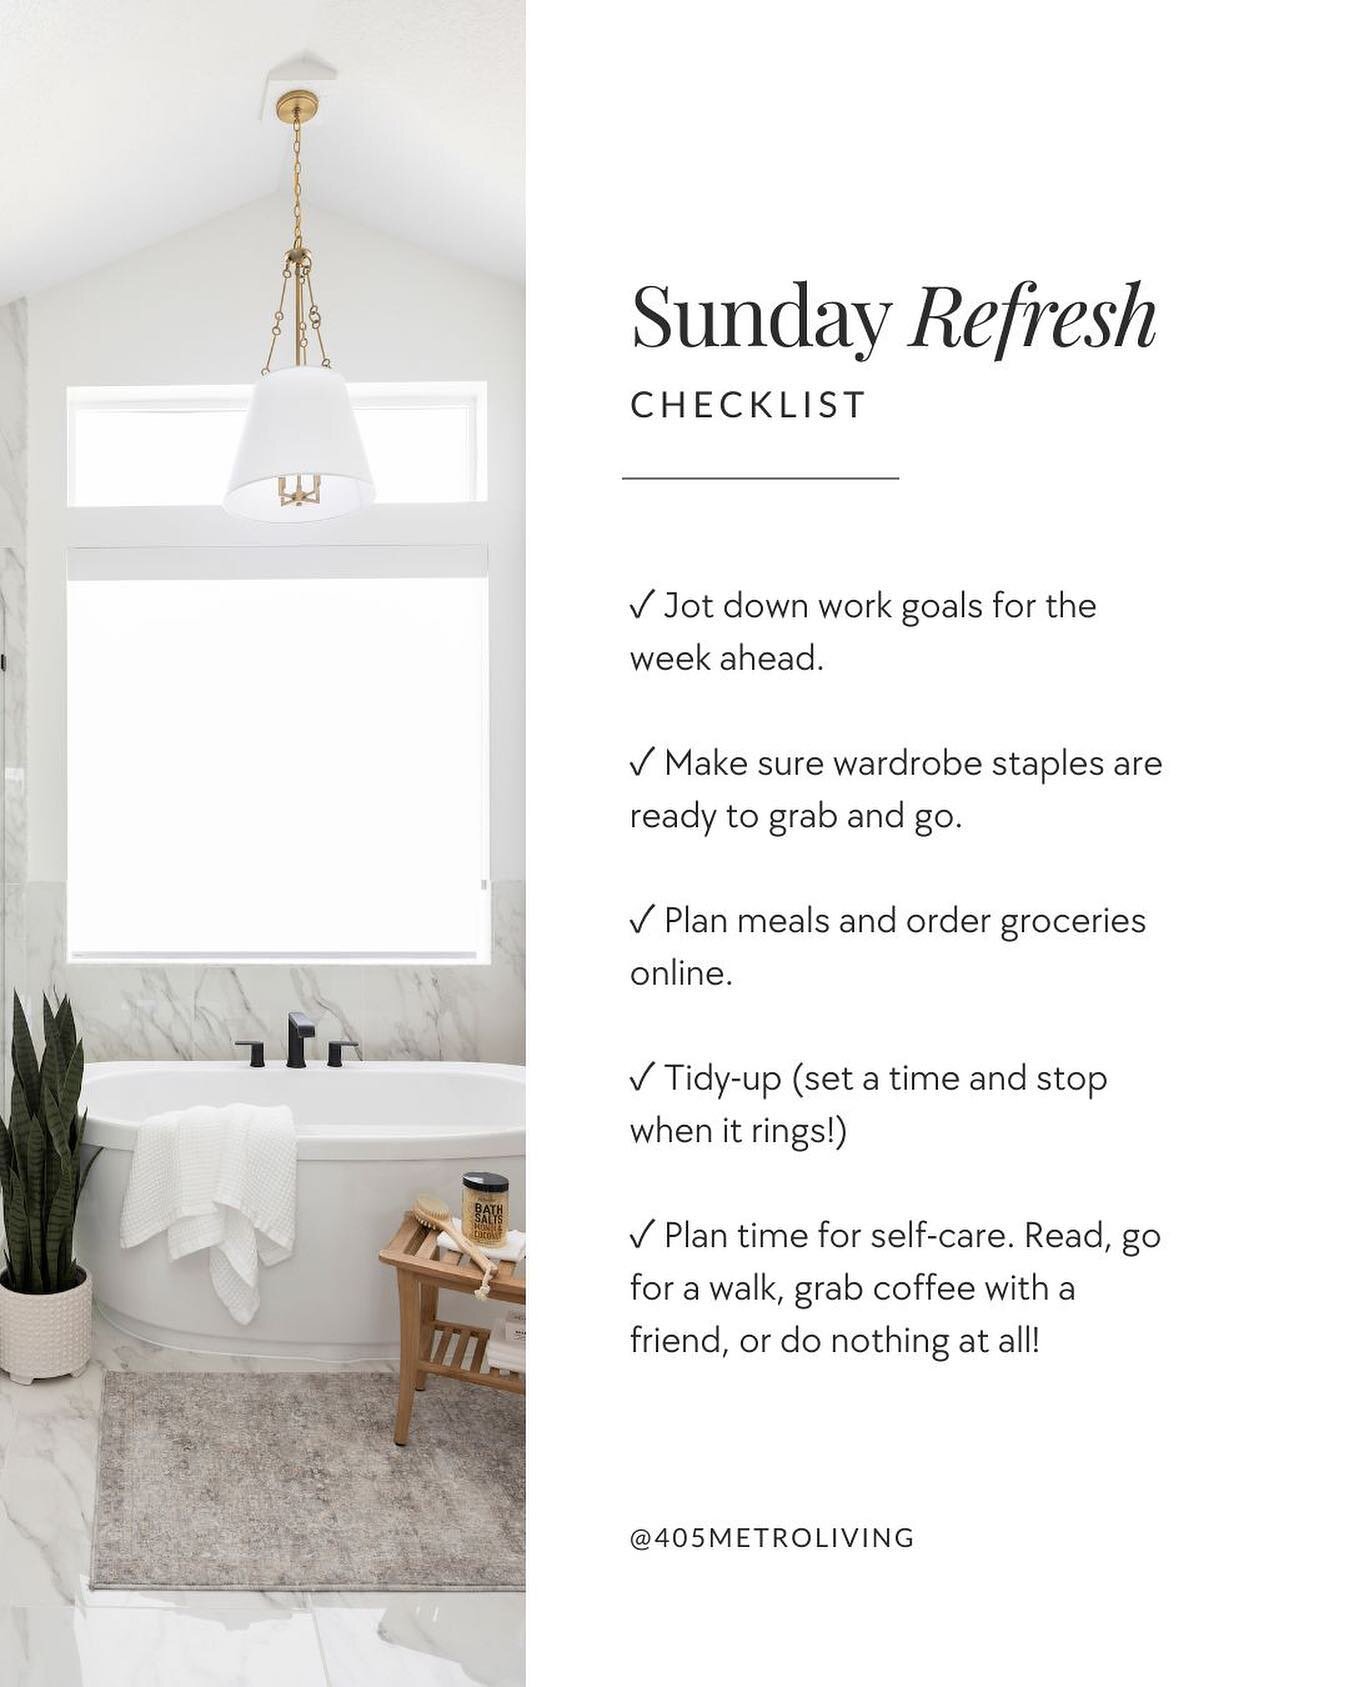 Sundays + sofas = Best combo ever. 

While Sundays are for slowing down, they&rsquo;re also for getting ready for the week ahead. Here's my (simple) Sunday refresh checklist:

- Jot down work goals for the week ahead.&nbsp;
- Make sure wardrobe stapl